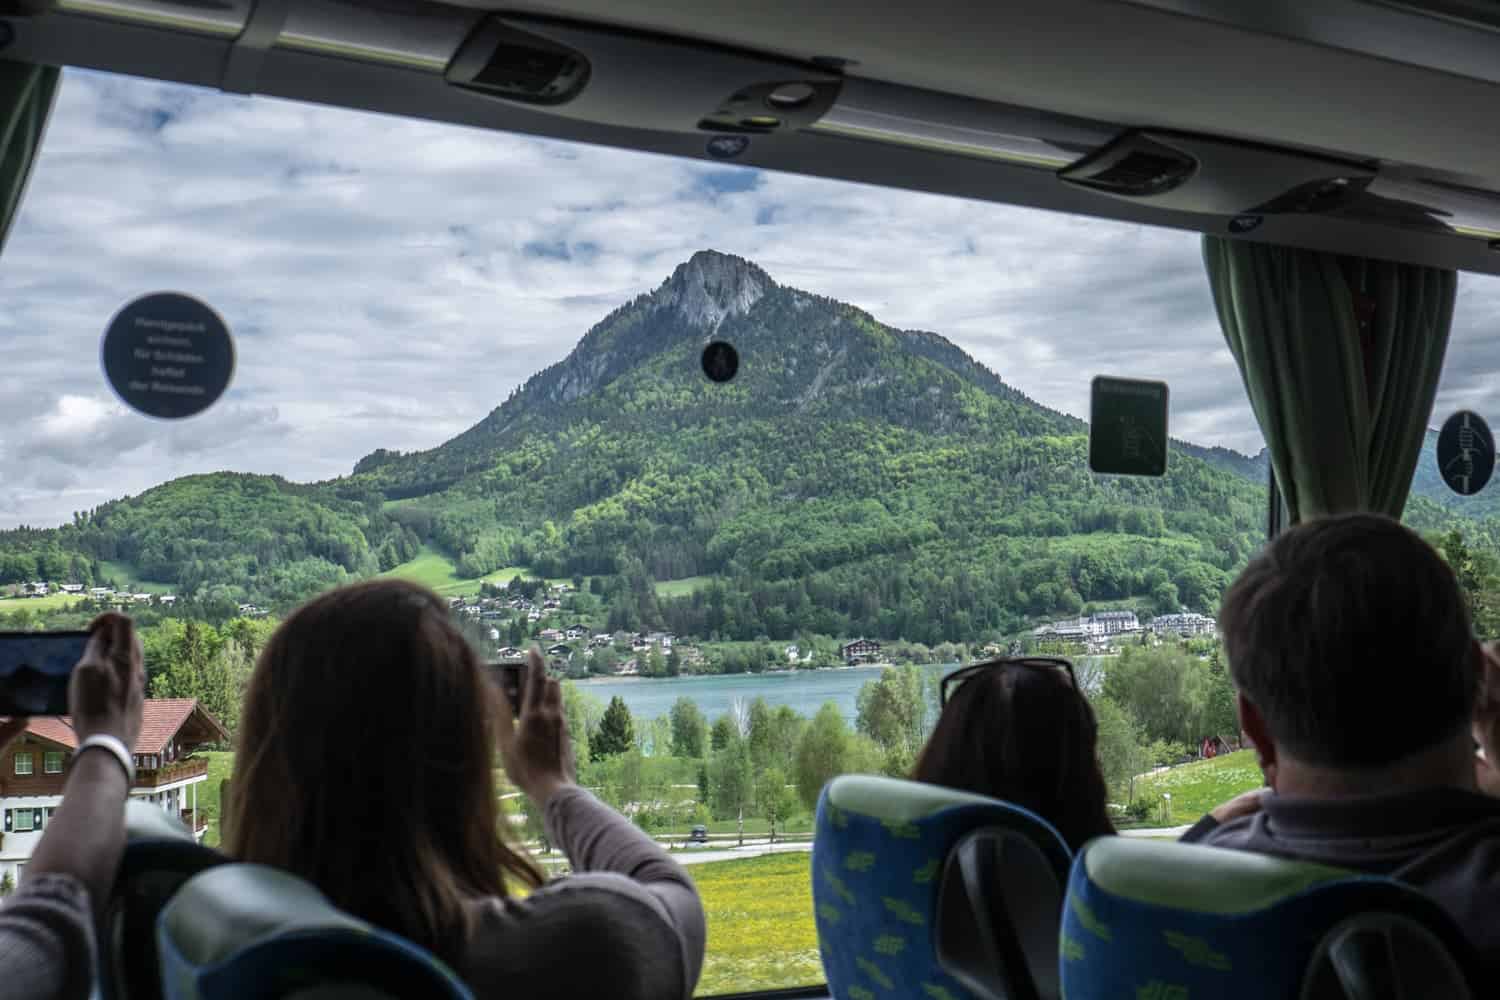 Visiting lake and mountain area of Salzburg on the Sound of Music bus tour, Austria